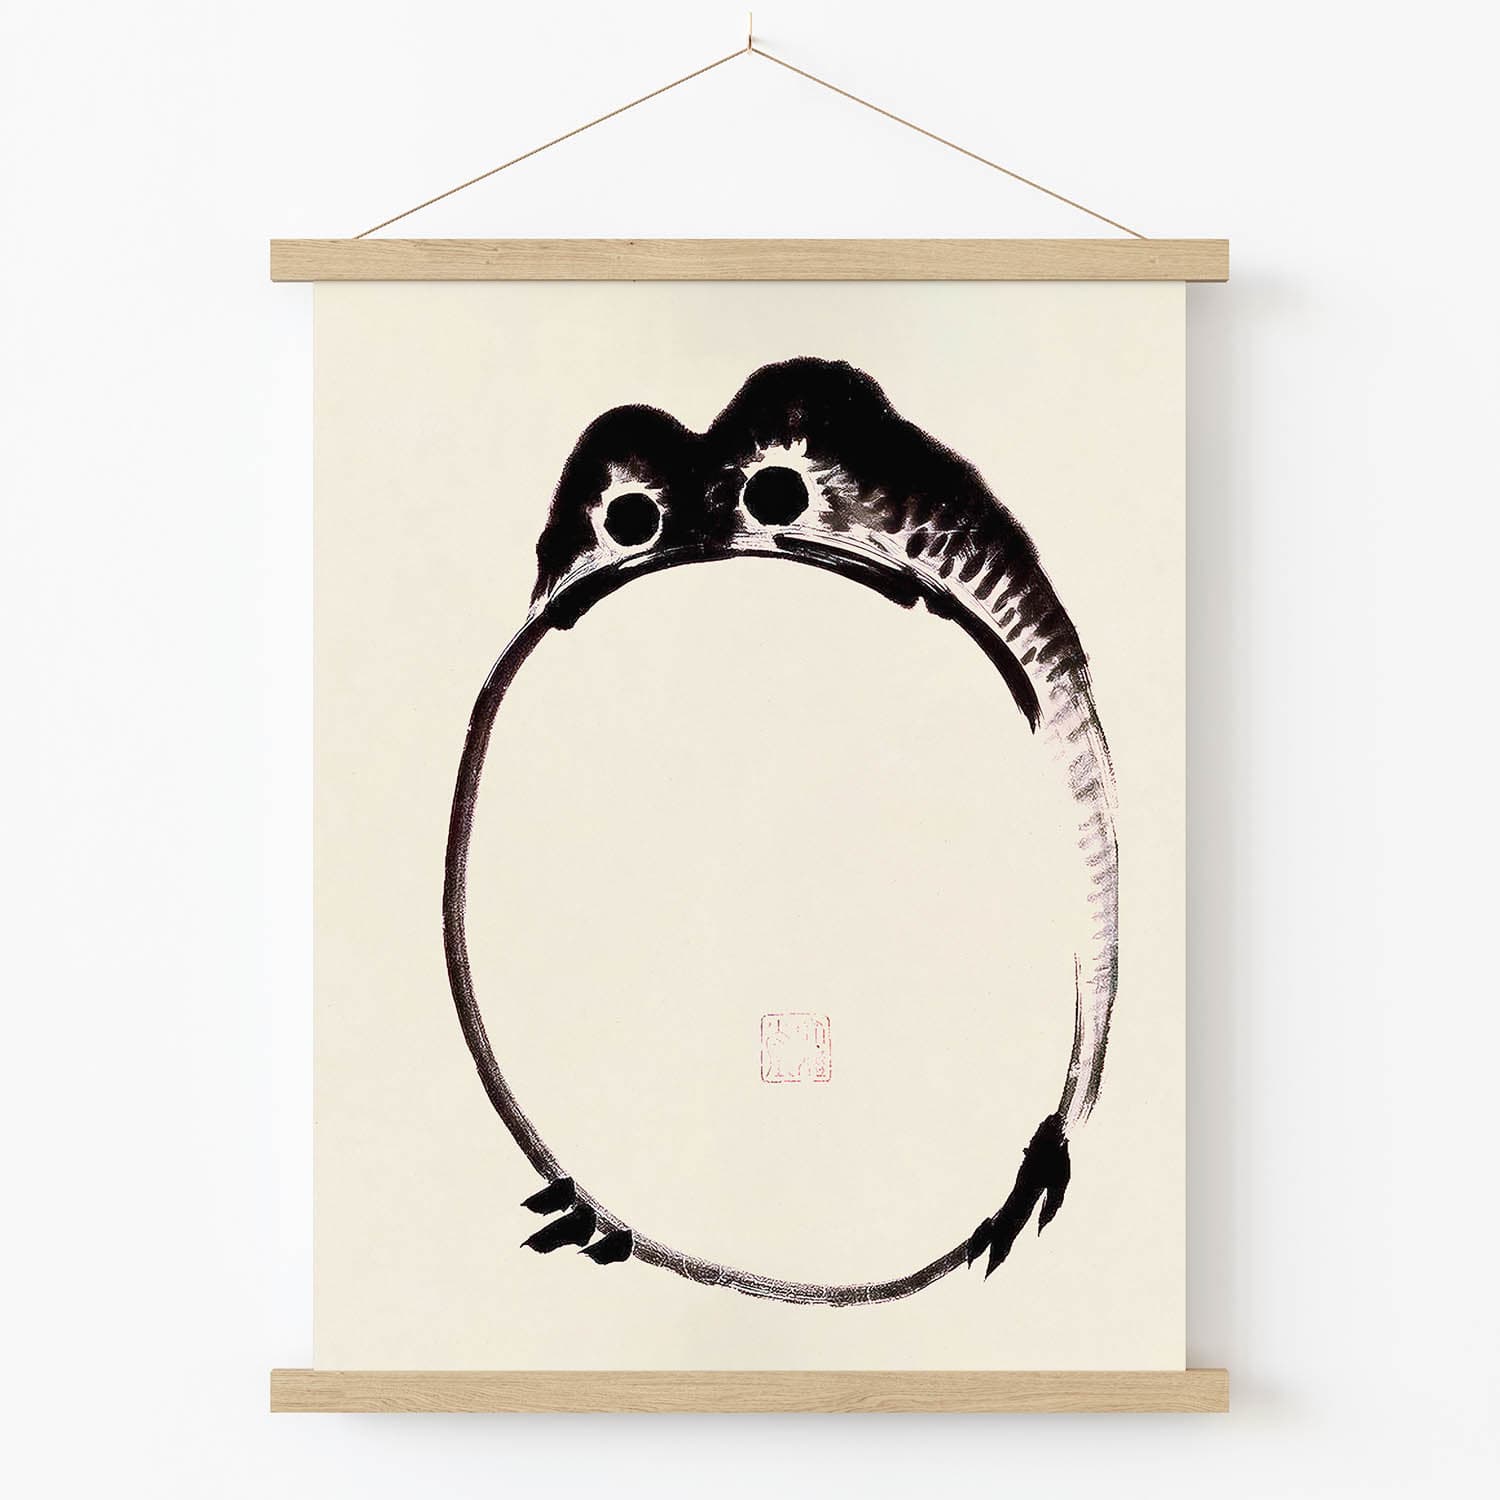 Funny Japanese Toad Art Print in Wood Hanger Frame on Wall